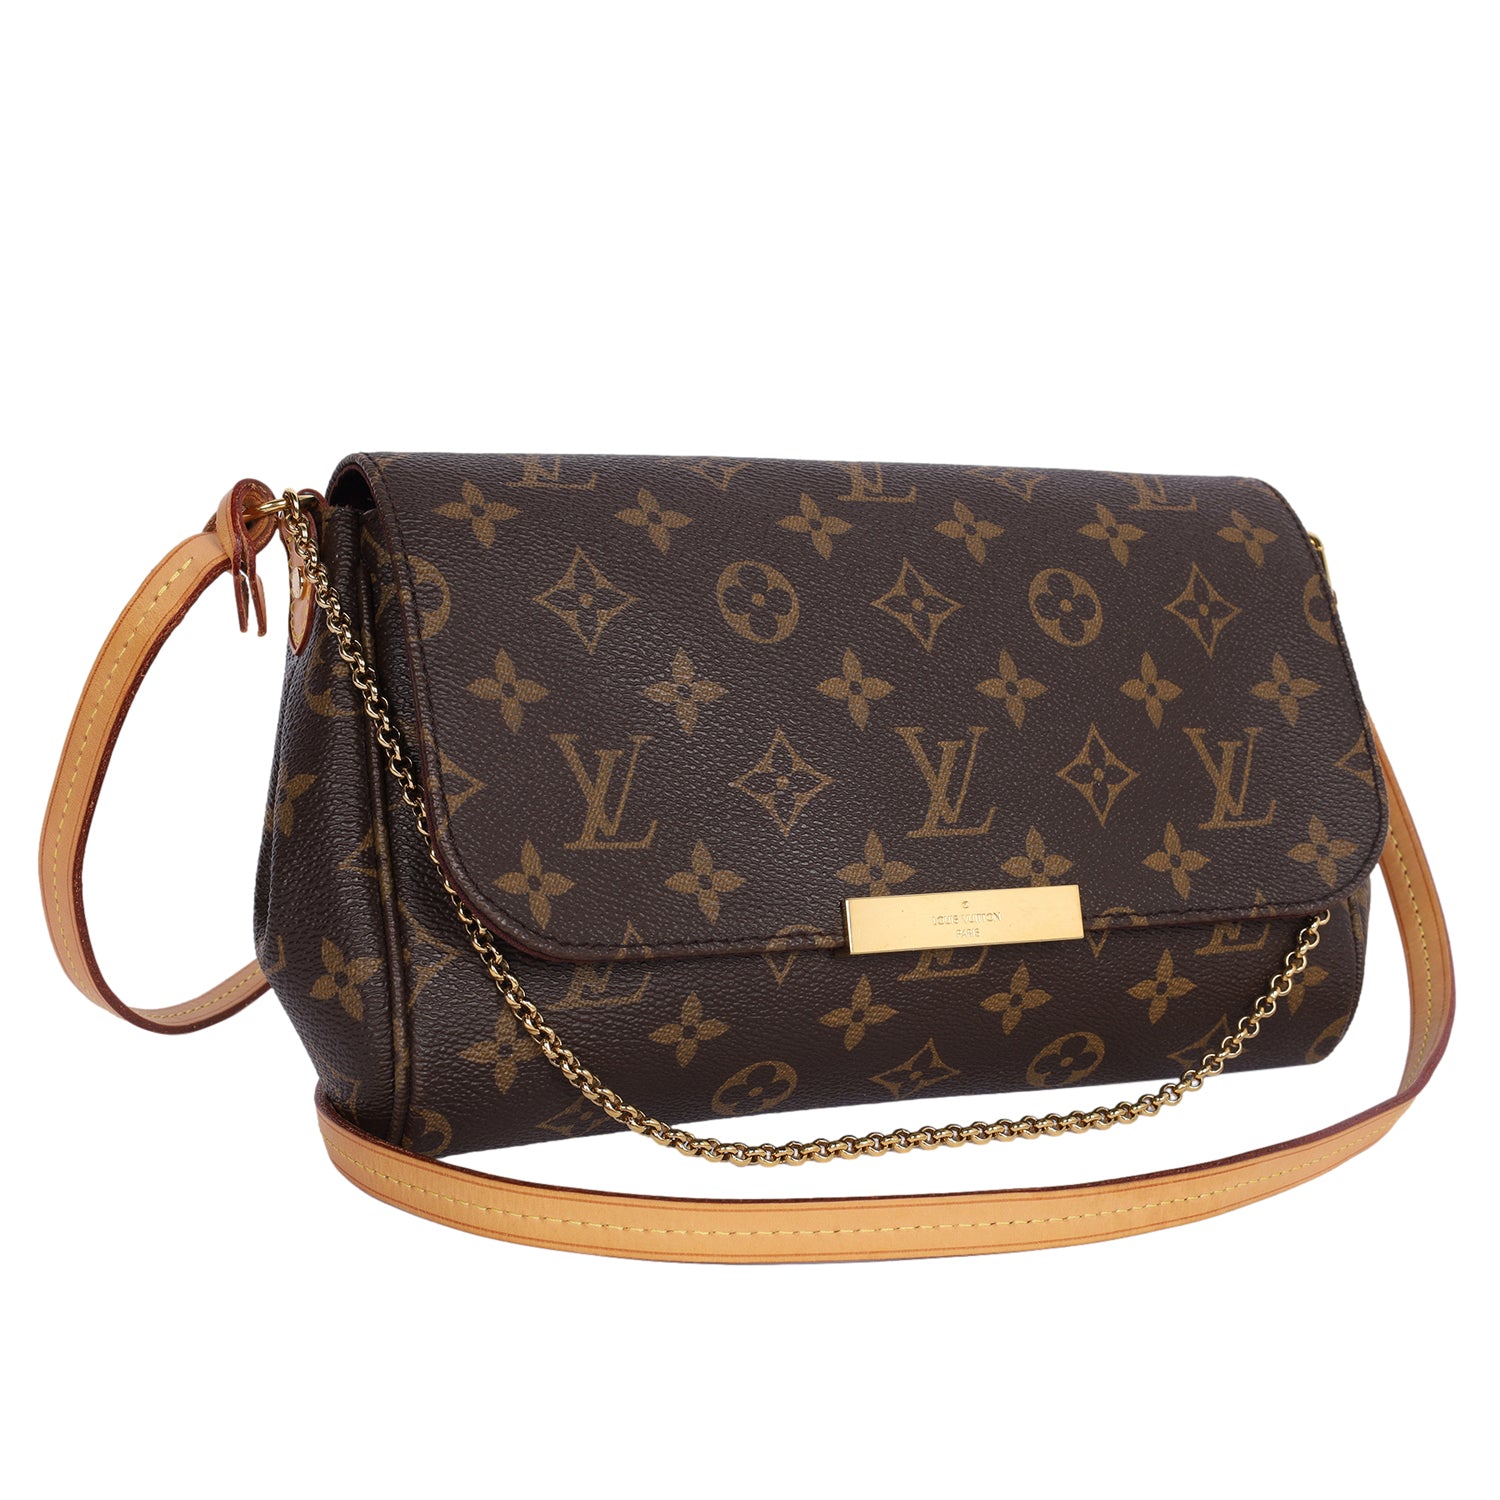 Monogram Favorite Crossbody Bag (Authentic Pre-Owned) – The Lady Bag